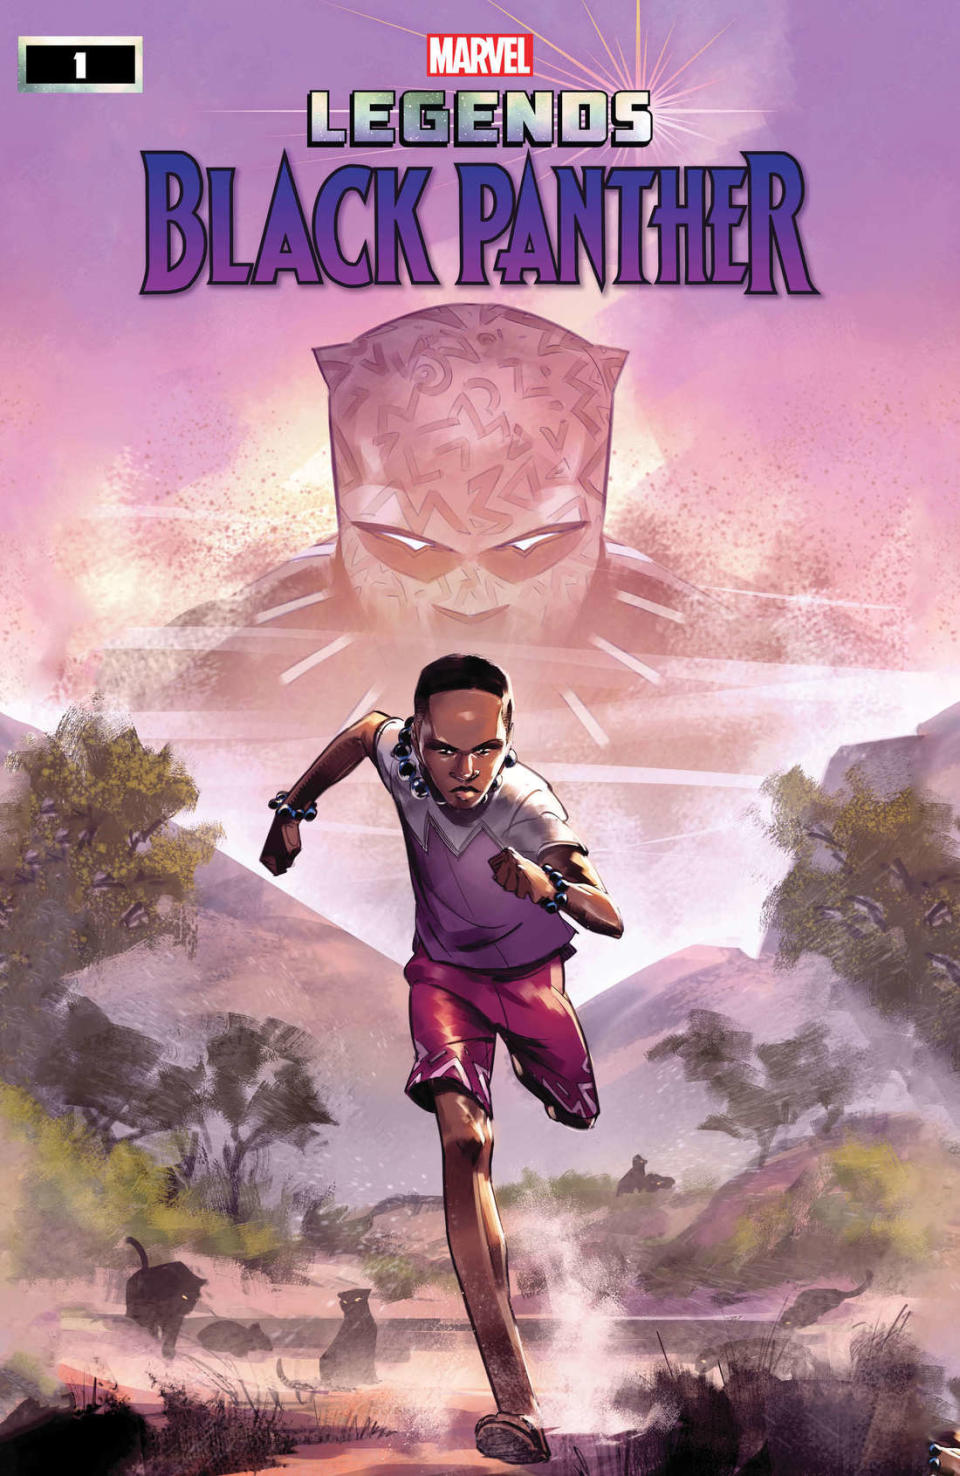 A comic book illustration of a young T'Challa running with Black Panther behind him in the sky on the cover of Black Panther Legends